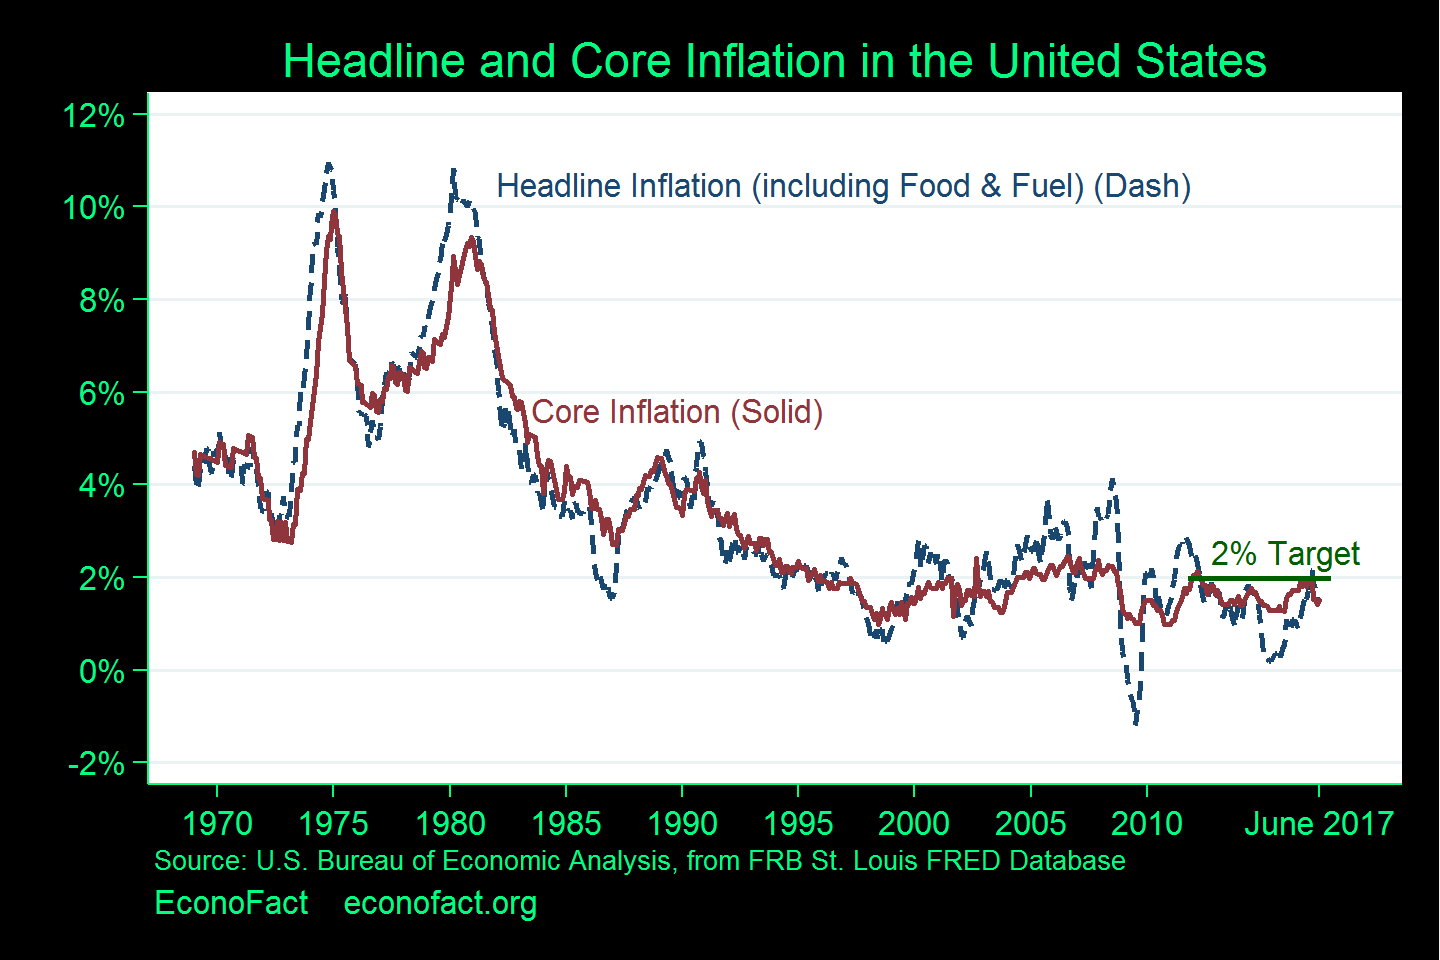 disadvantages of inflation targeting include